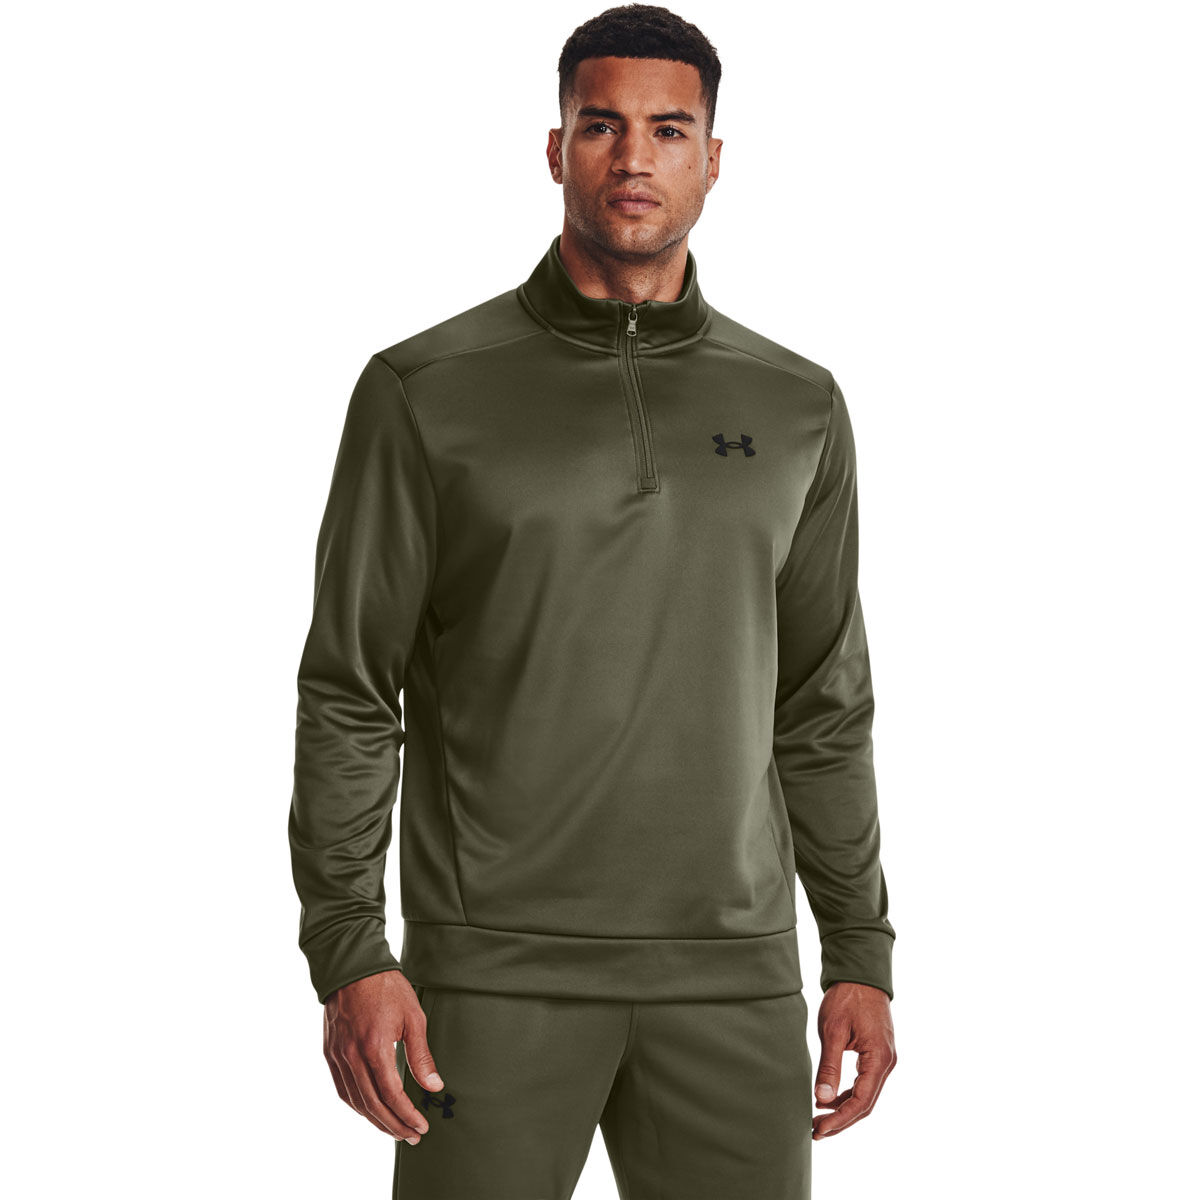  Under Armour Boys' Armour Fleece® Branded Hoodie YLG Black :  Clothing, Shoes & Jewelry